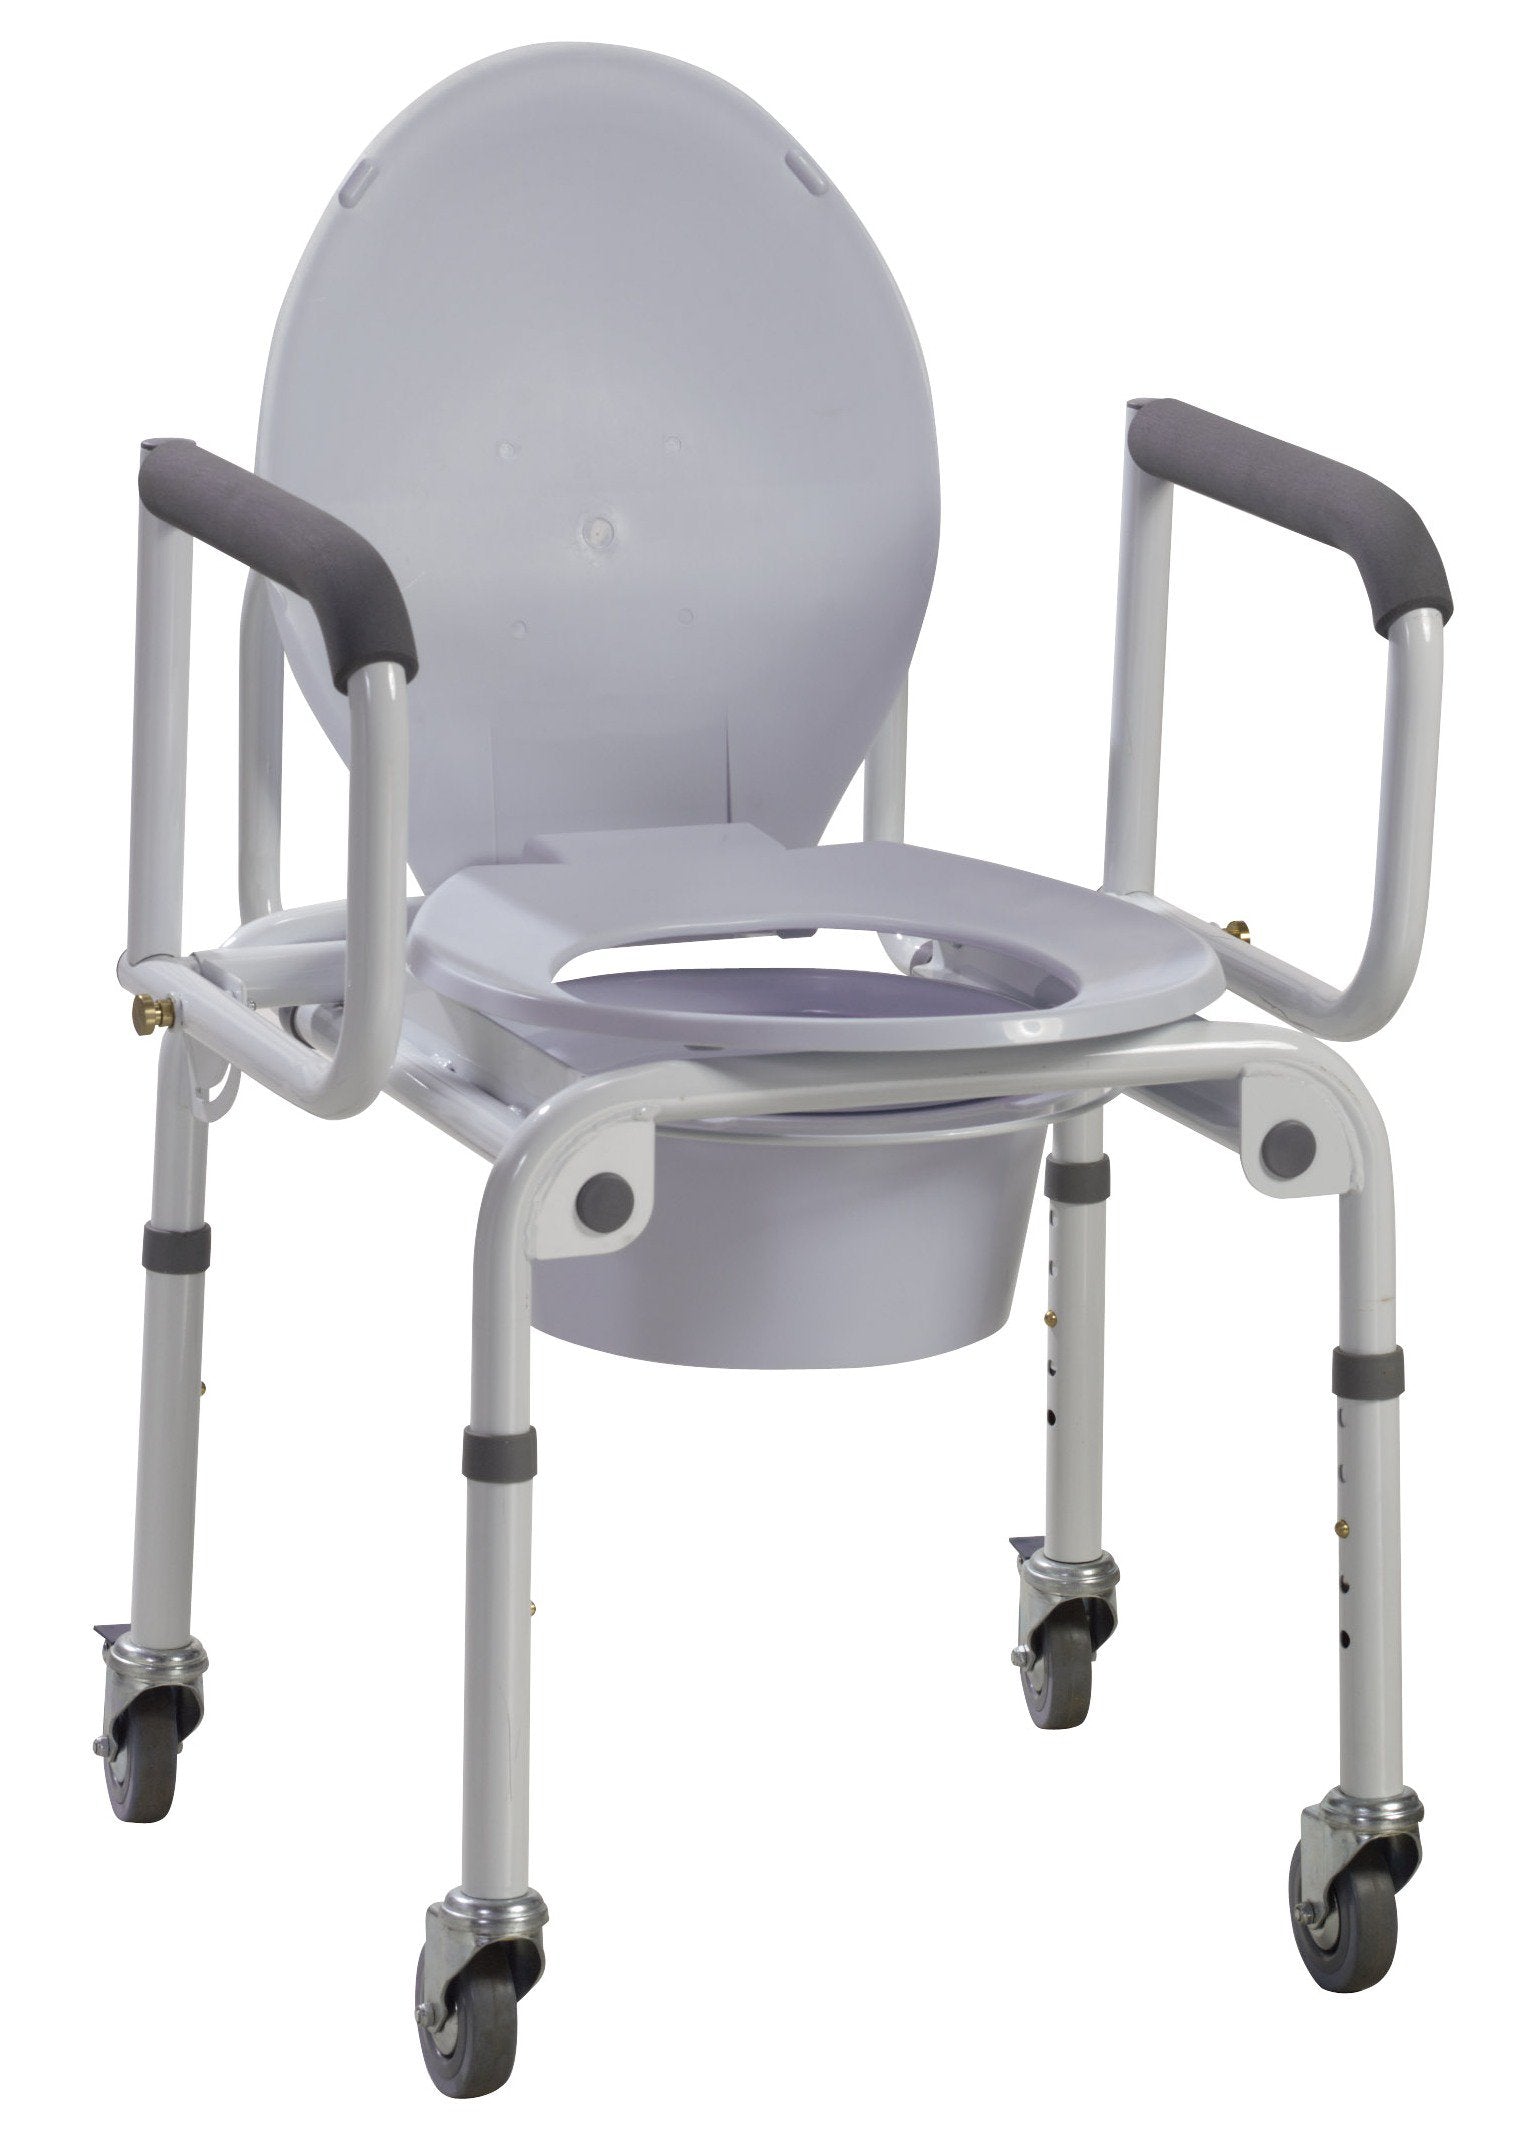 Commode Chair drive™ Padded Drop Arms Steel Frame 14 Inch Seat Width 300 lbs. Weight Capacity